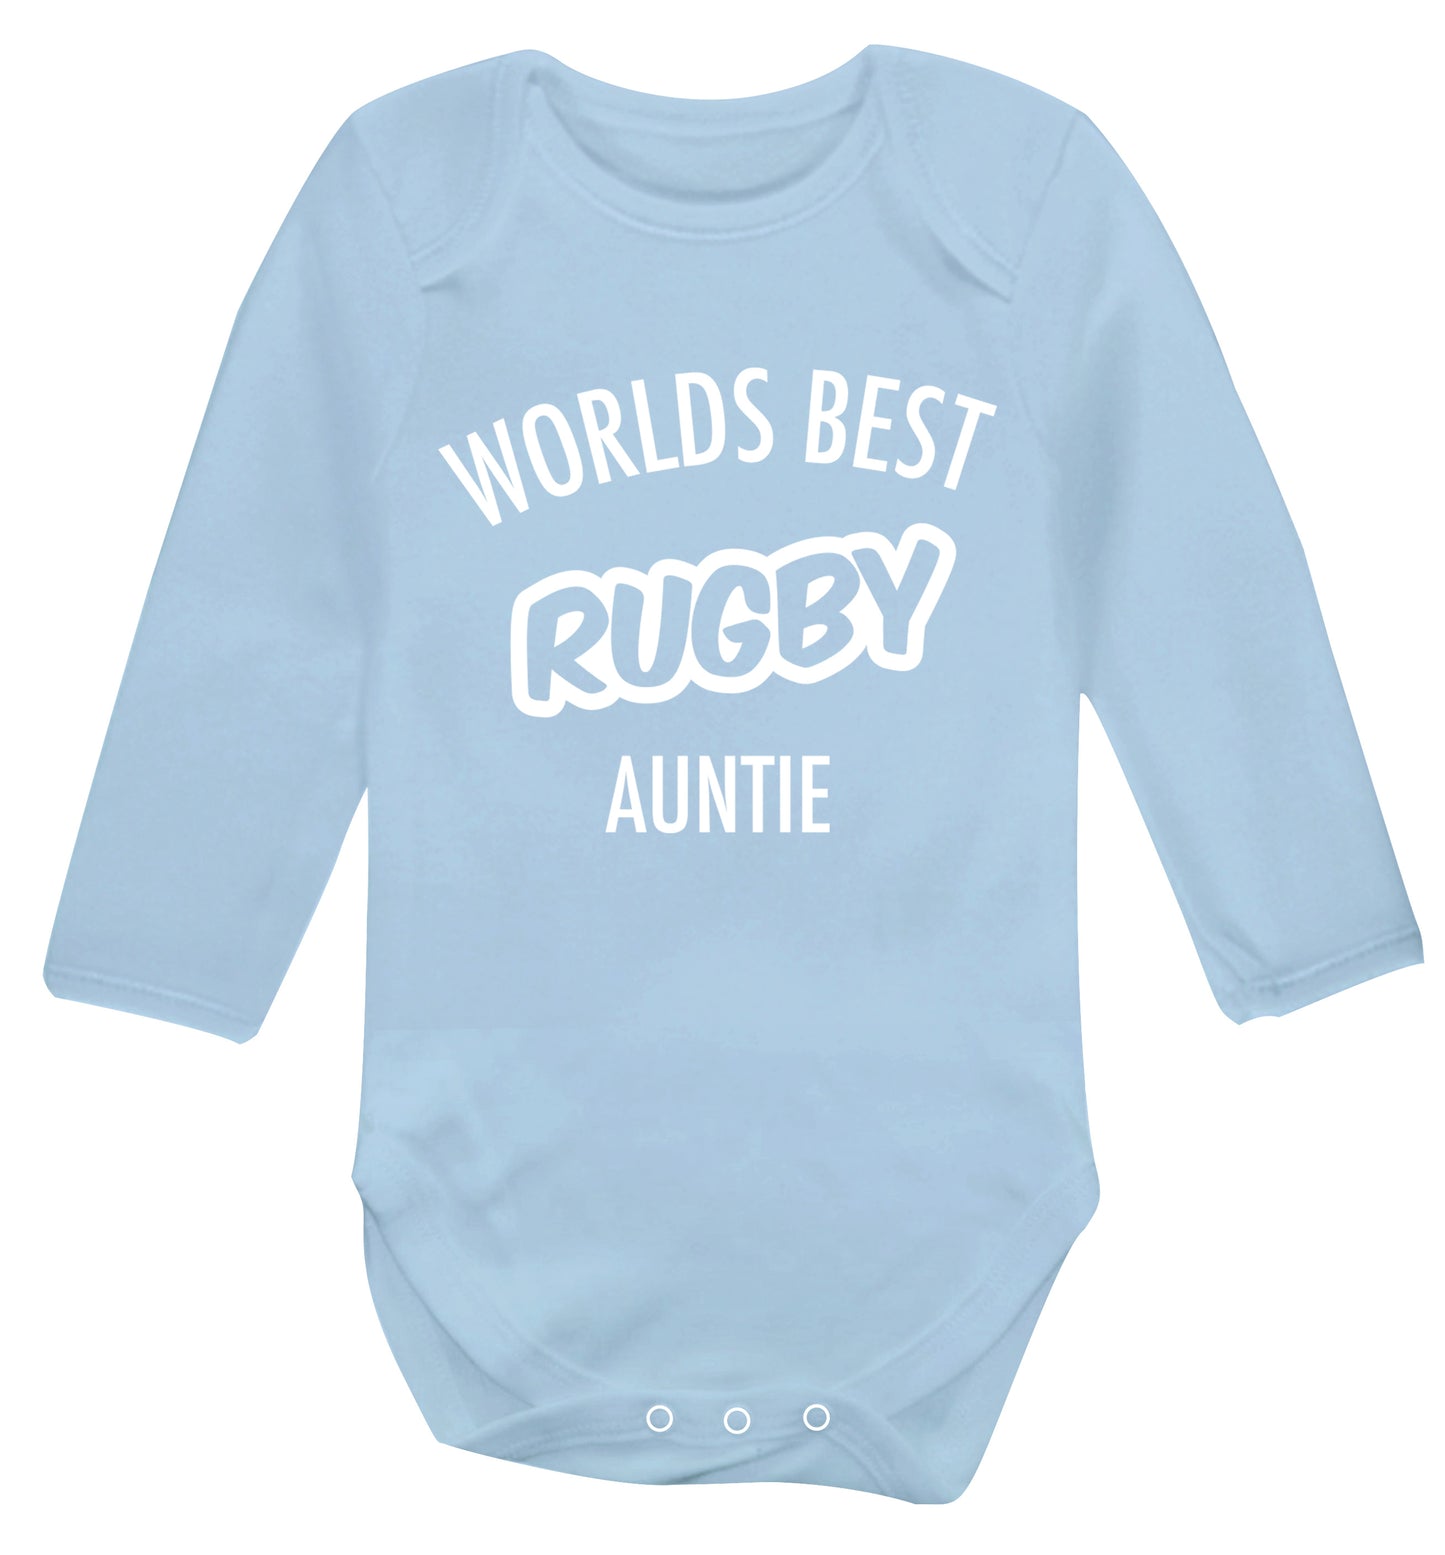 Worlds best rugby auntie Baby Vest long sleeved pale blue 6-12 months